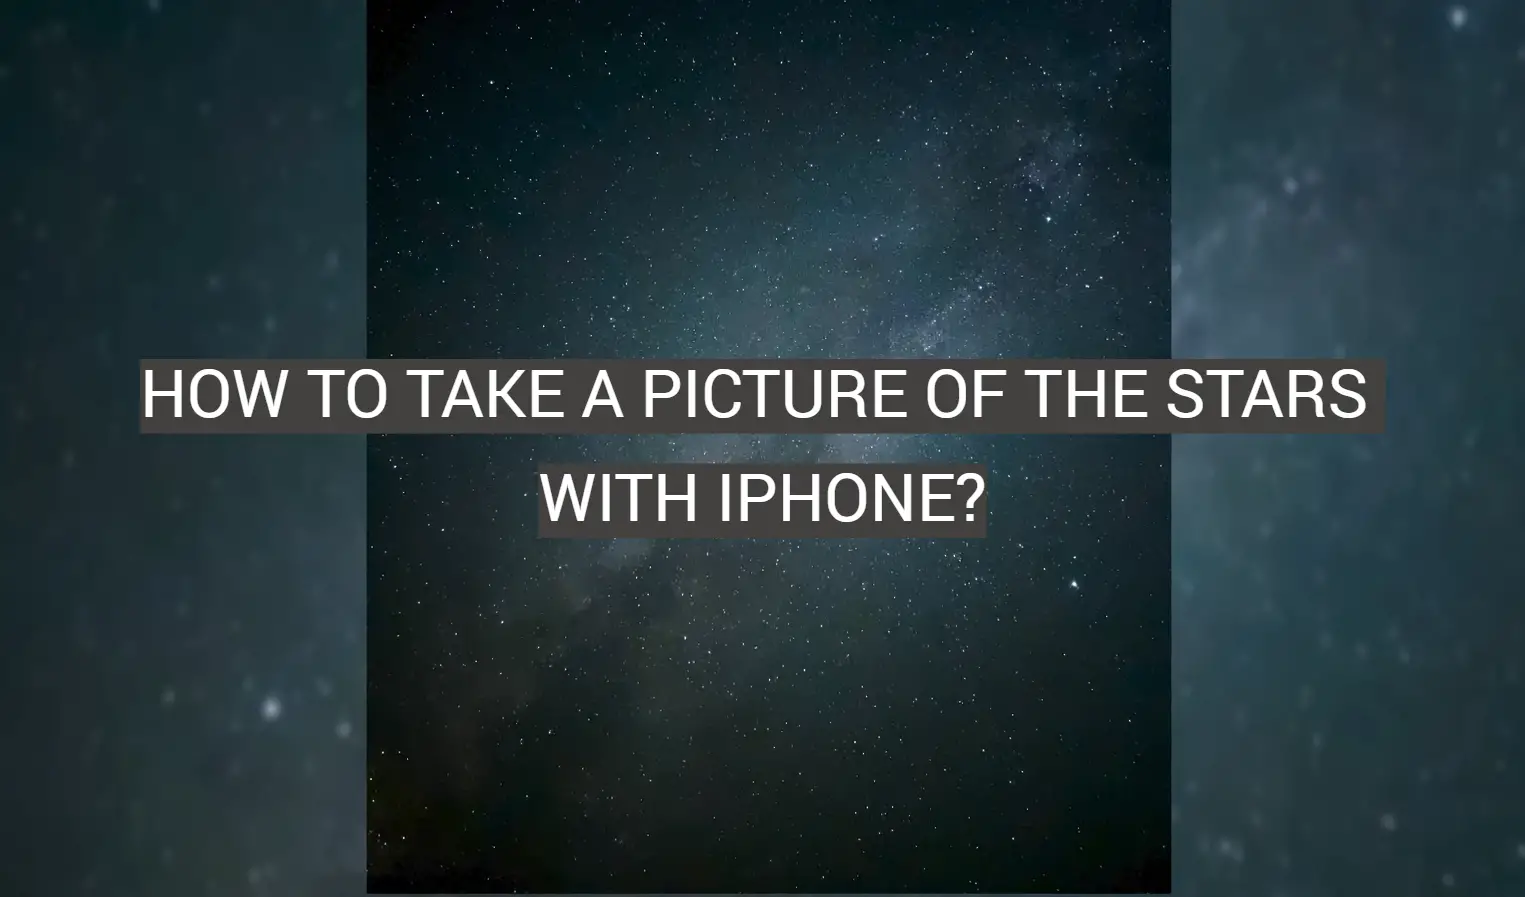 How to Take a Picture of the Stars With iPhone?